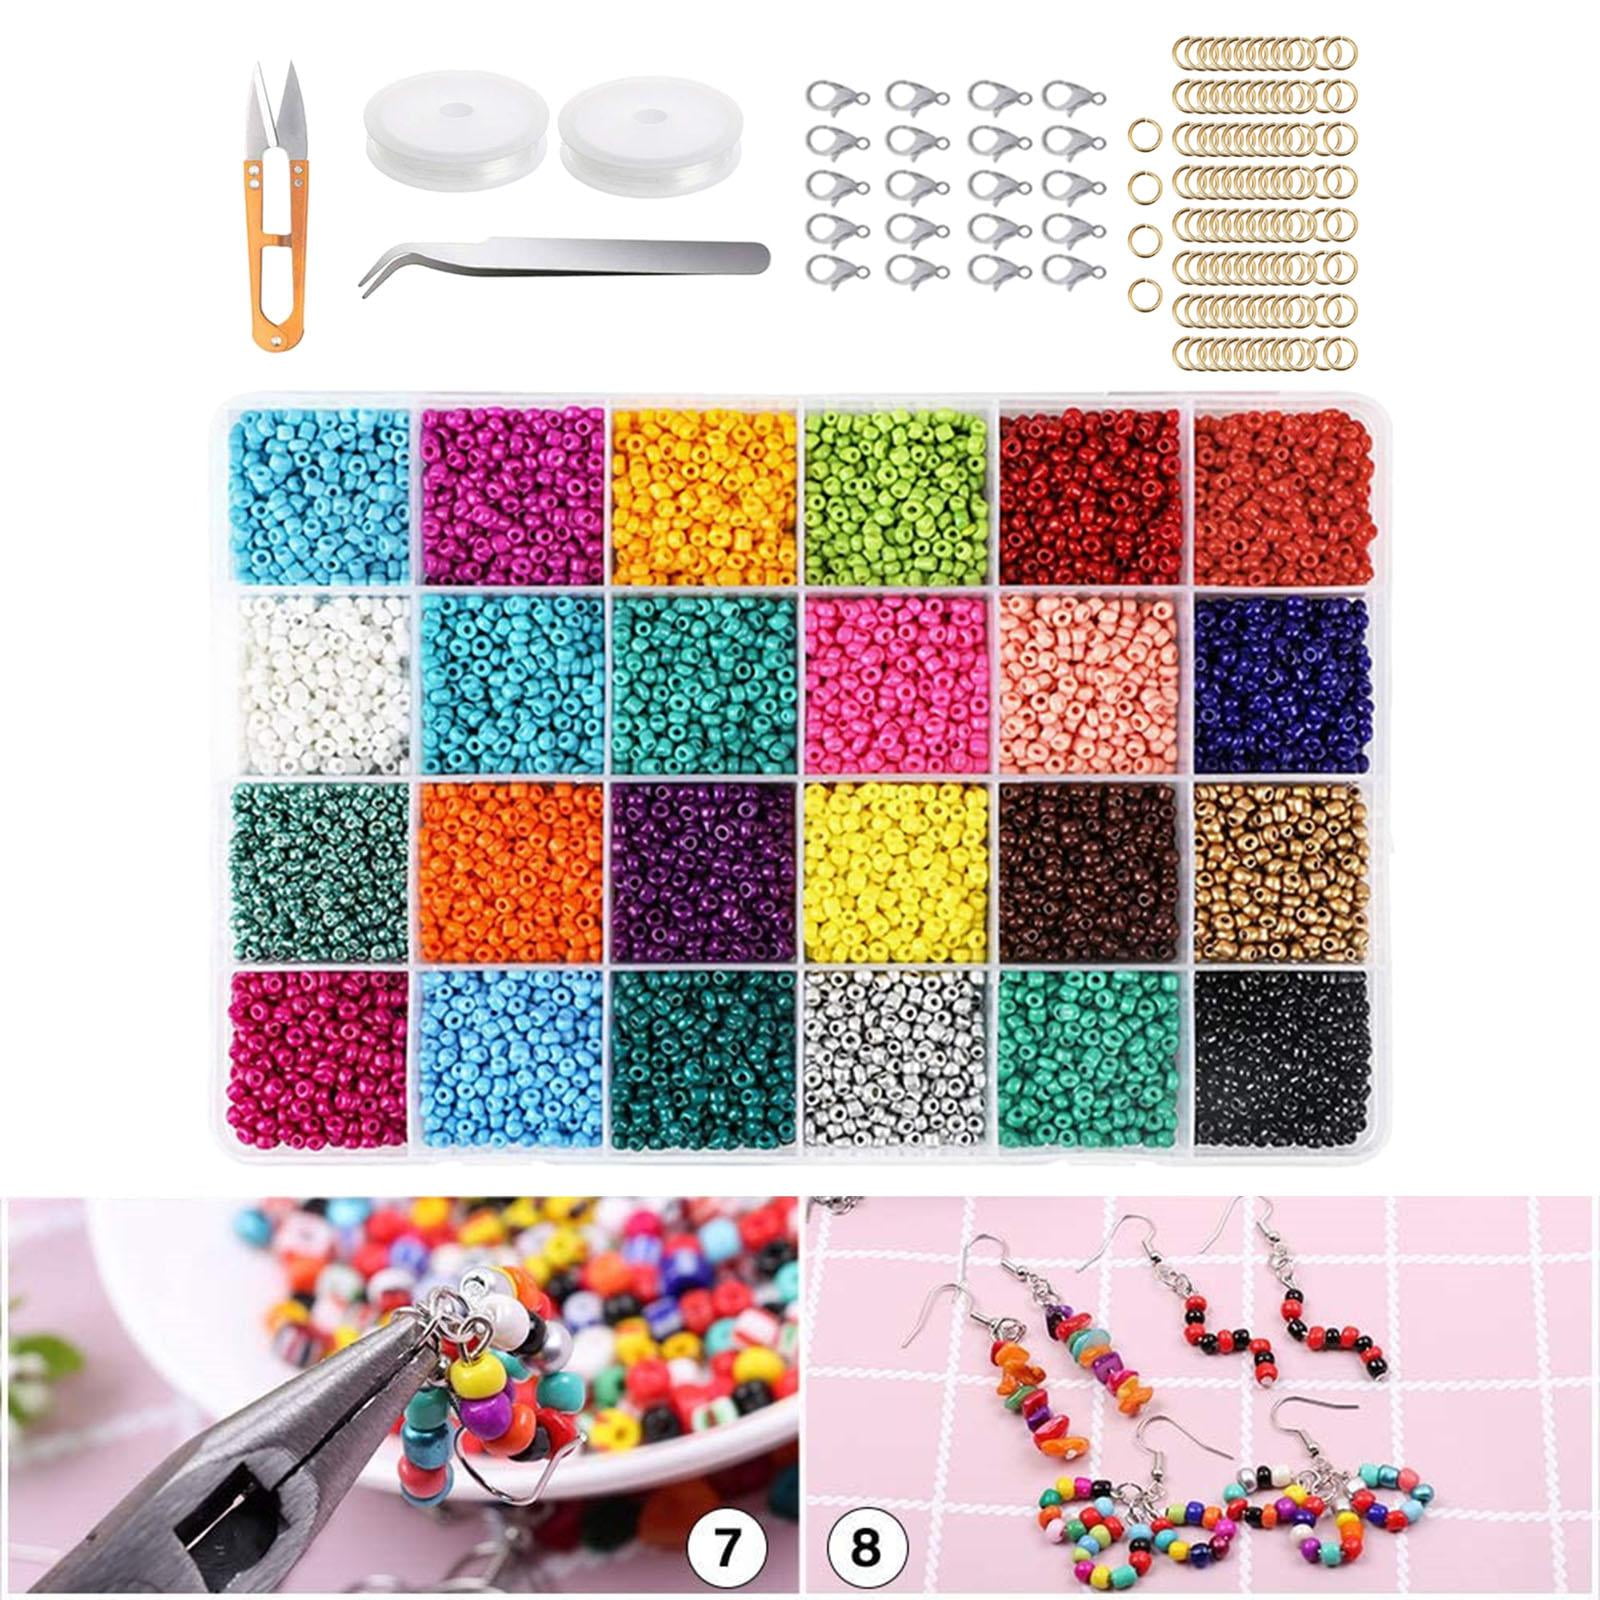 Artsy Crafts 3mm Assorted Glass Seed Beads 6000pcs, 8/0 Mermaid Colors Glow in The Dark Beads Spacer Beads for Jewelry Making Bracelets Necklace